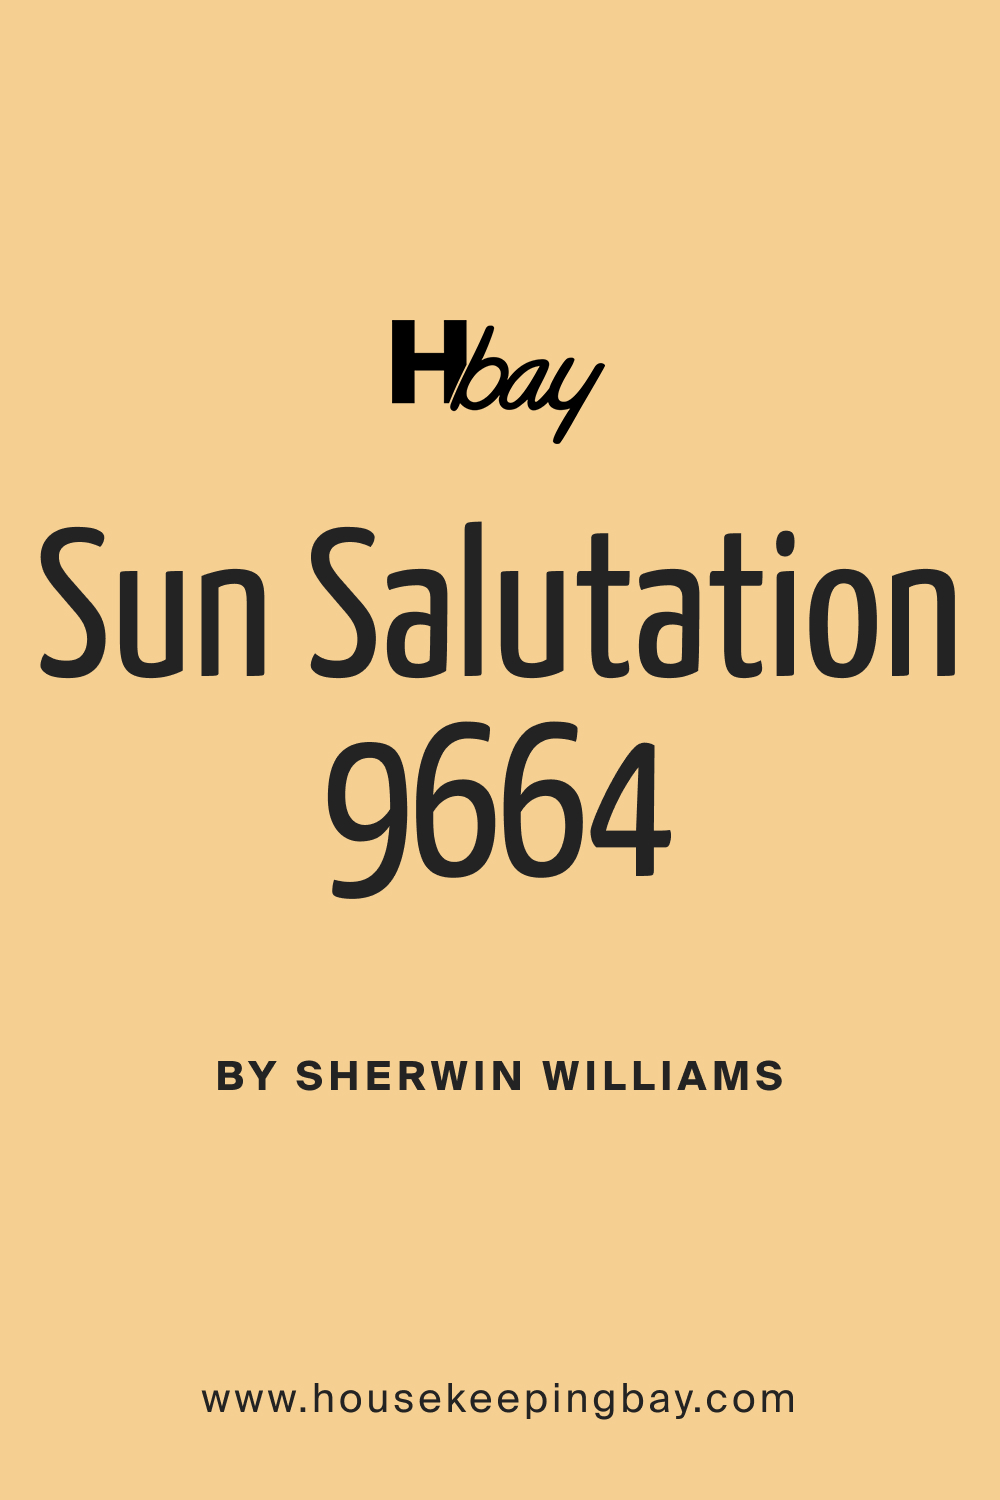 Sun Salutation SW 9664 Paint Color by Sherwin Williams